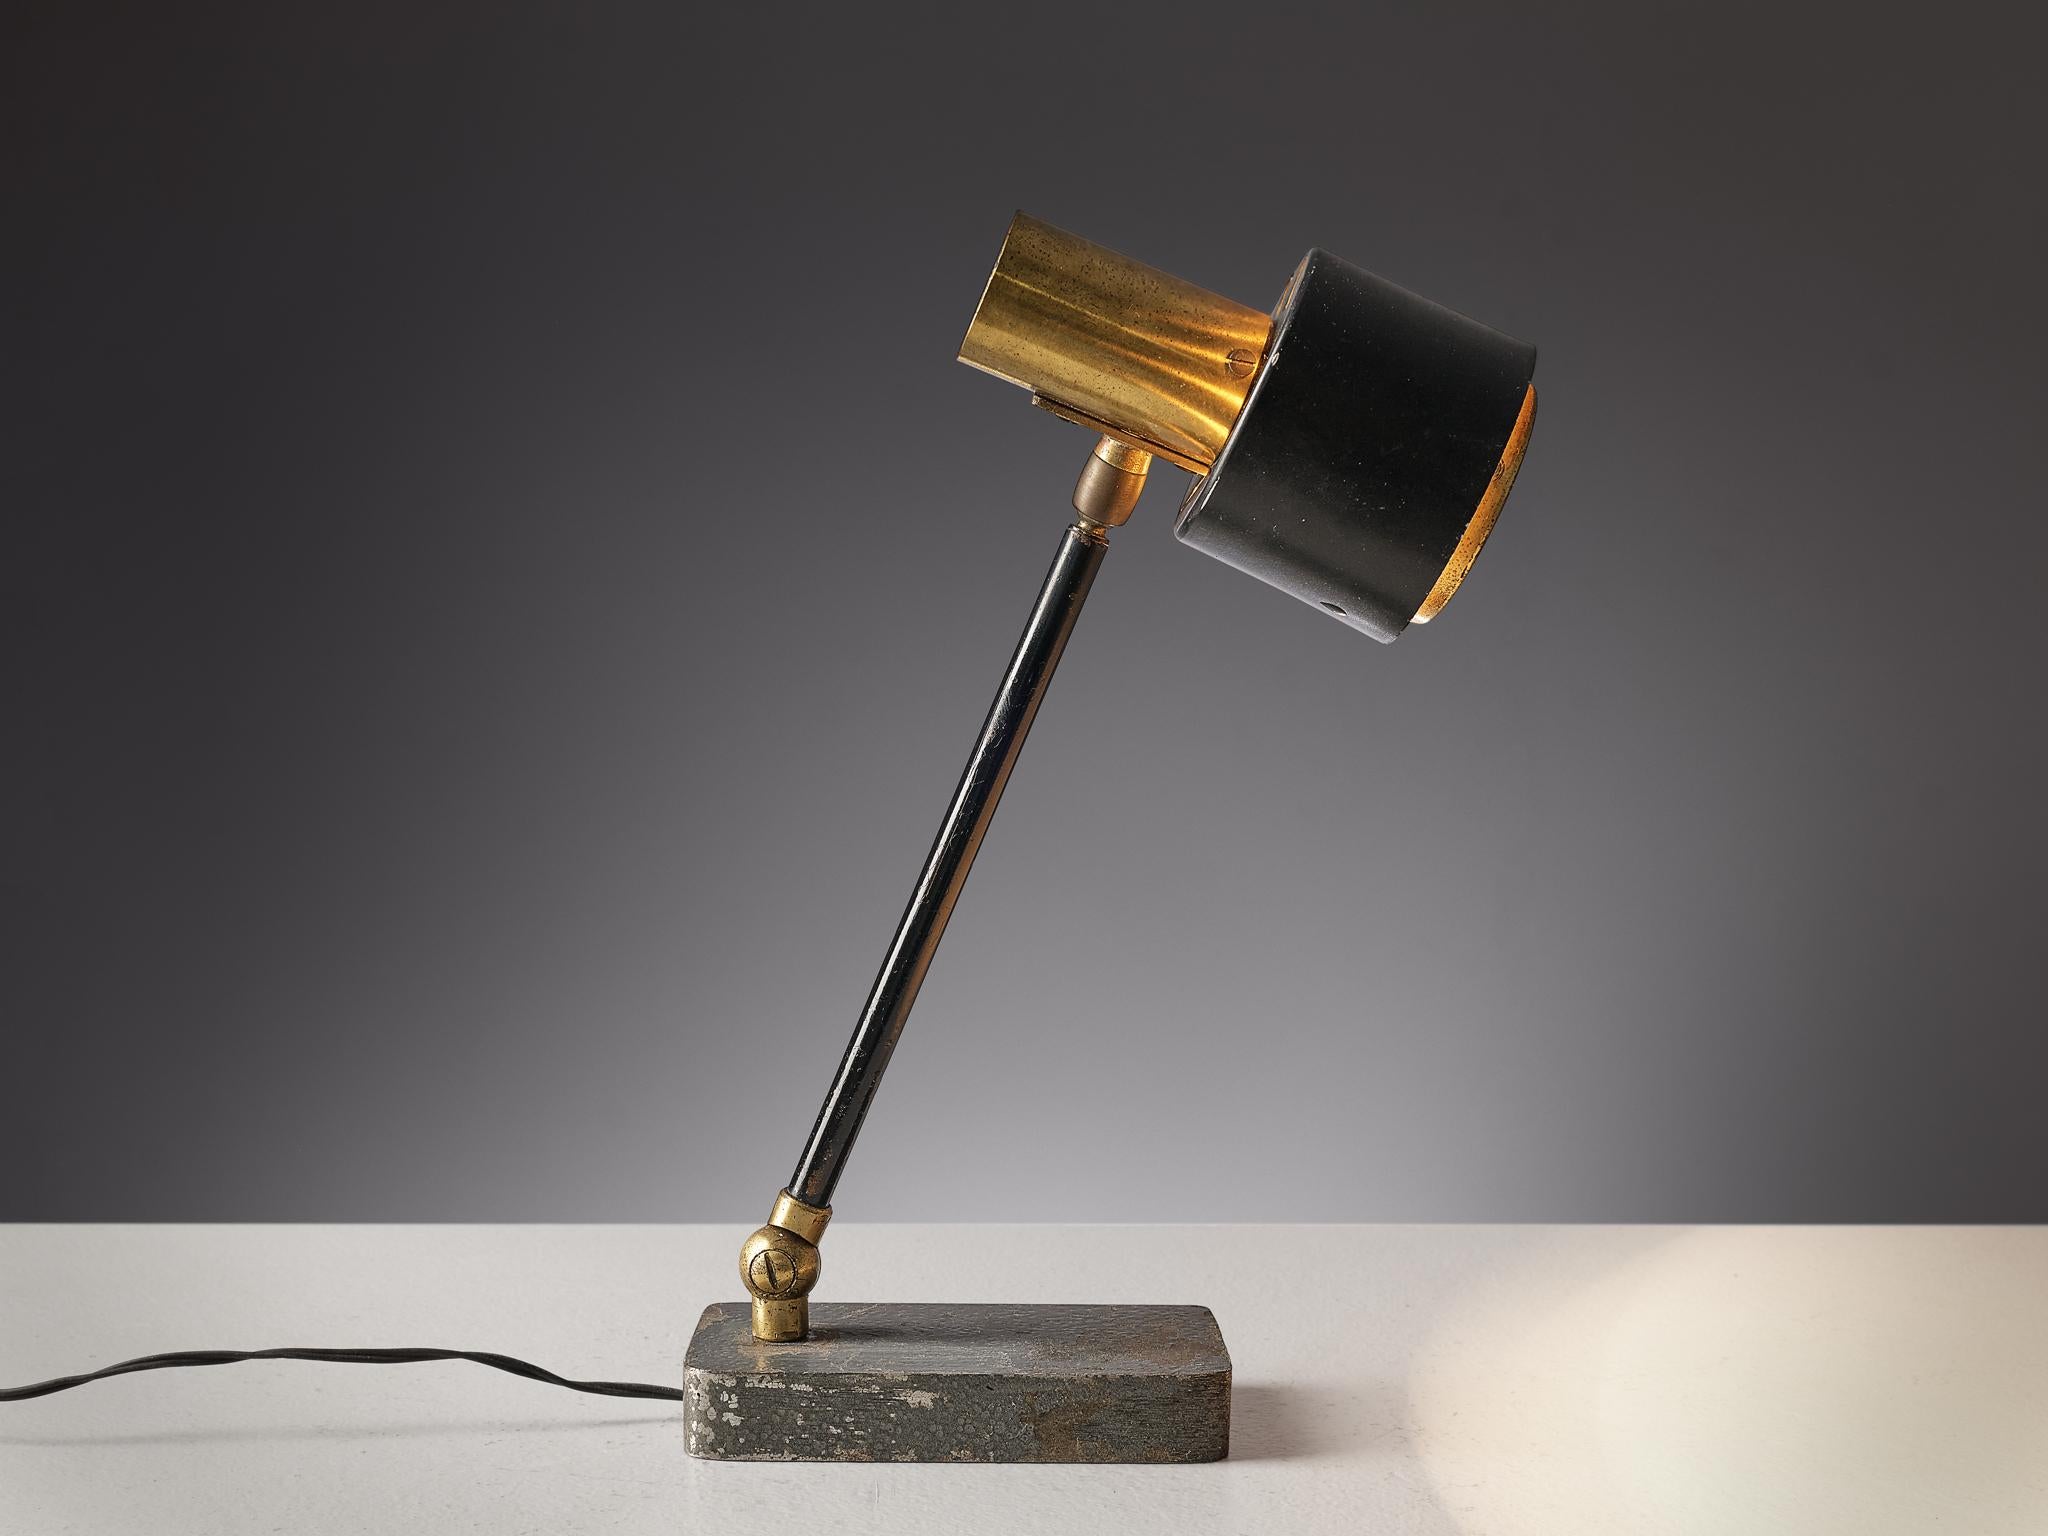 Table lamp, brass, aluminum, metal, Italy, 1960s.

This table desk lamp is stunningly executed in brass and metal. It features a simple but elegant shades consisting of brass and a black aluminum. The base of this is a rectangular shape made out